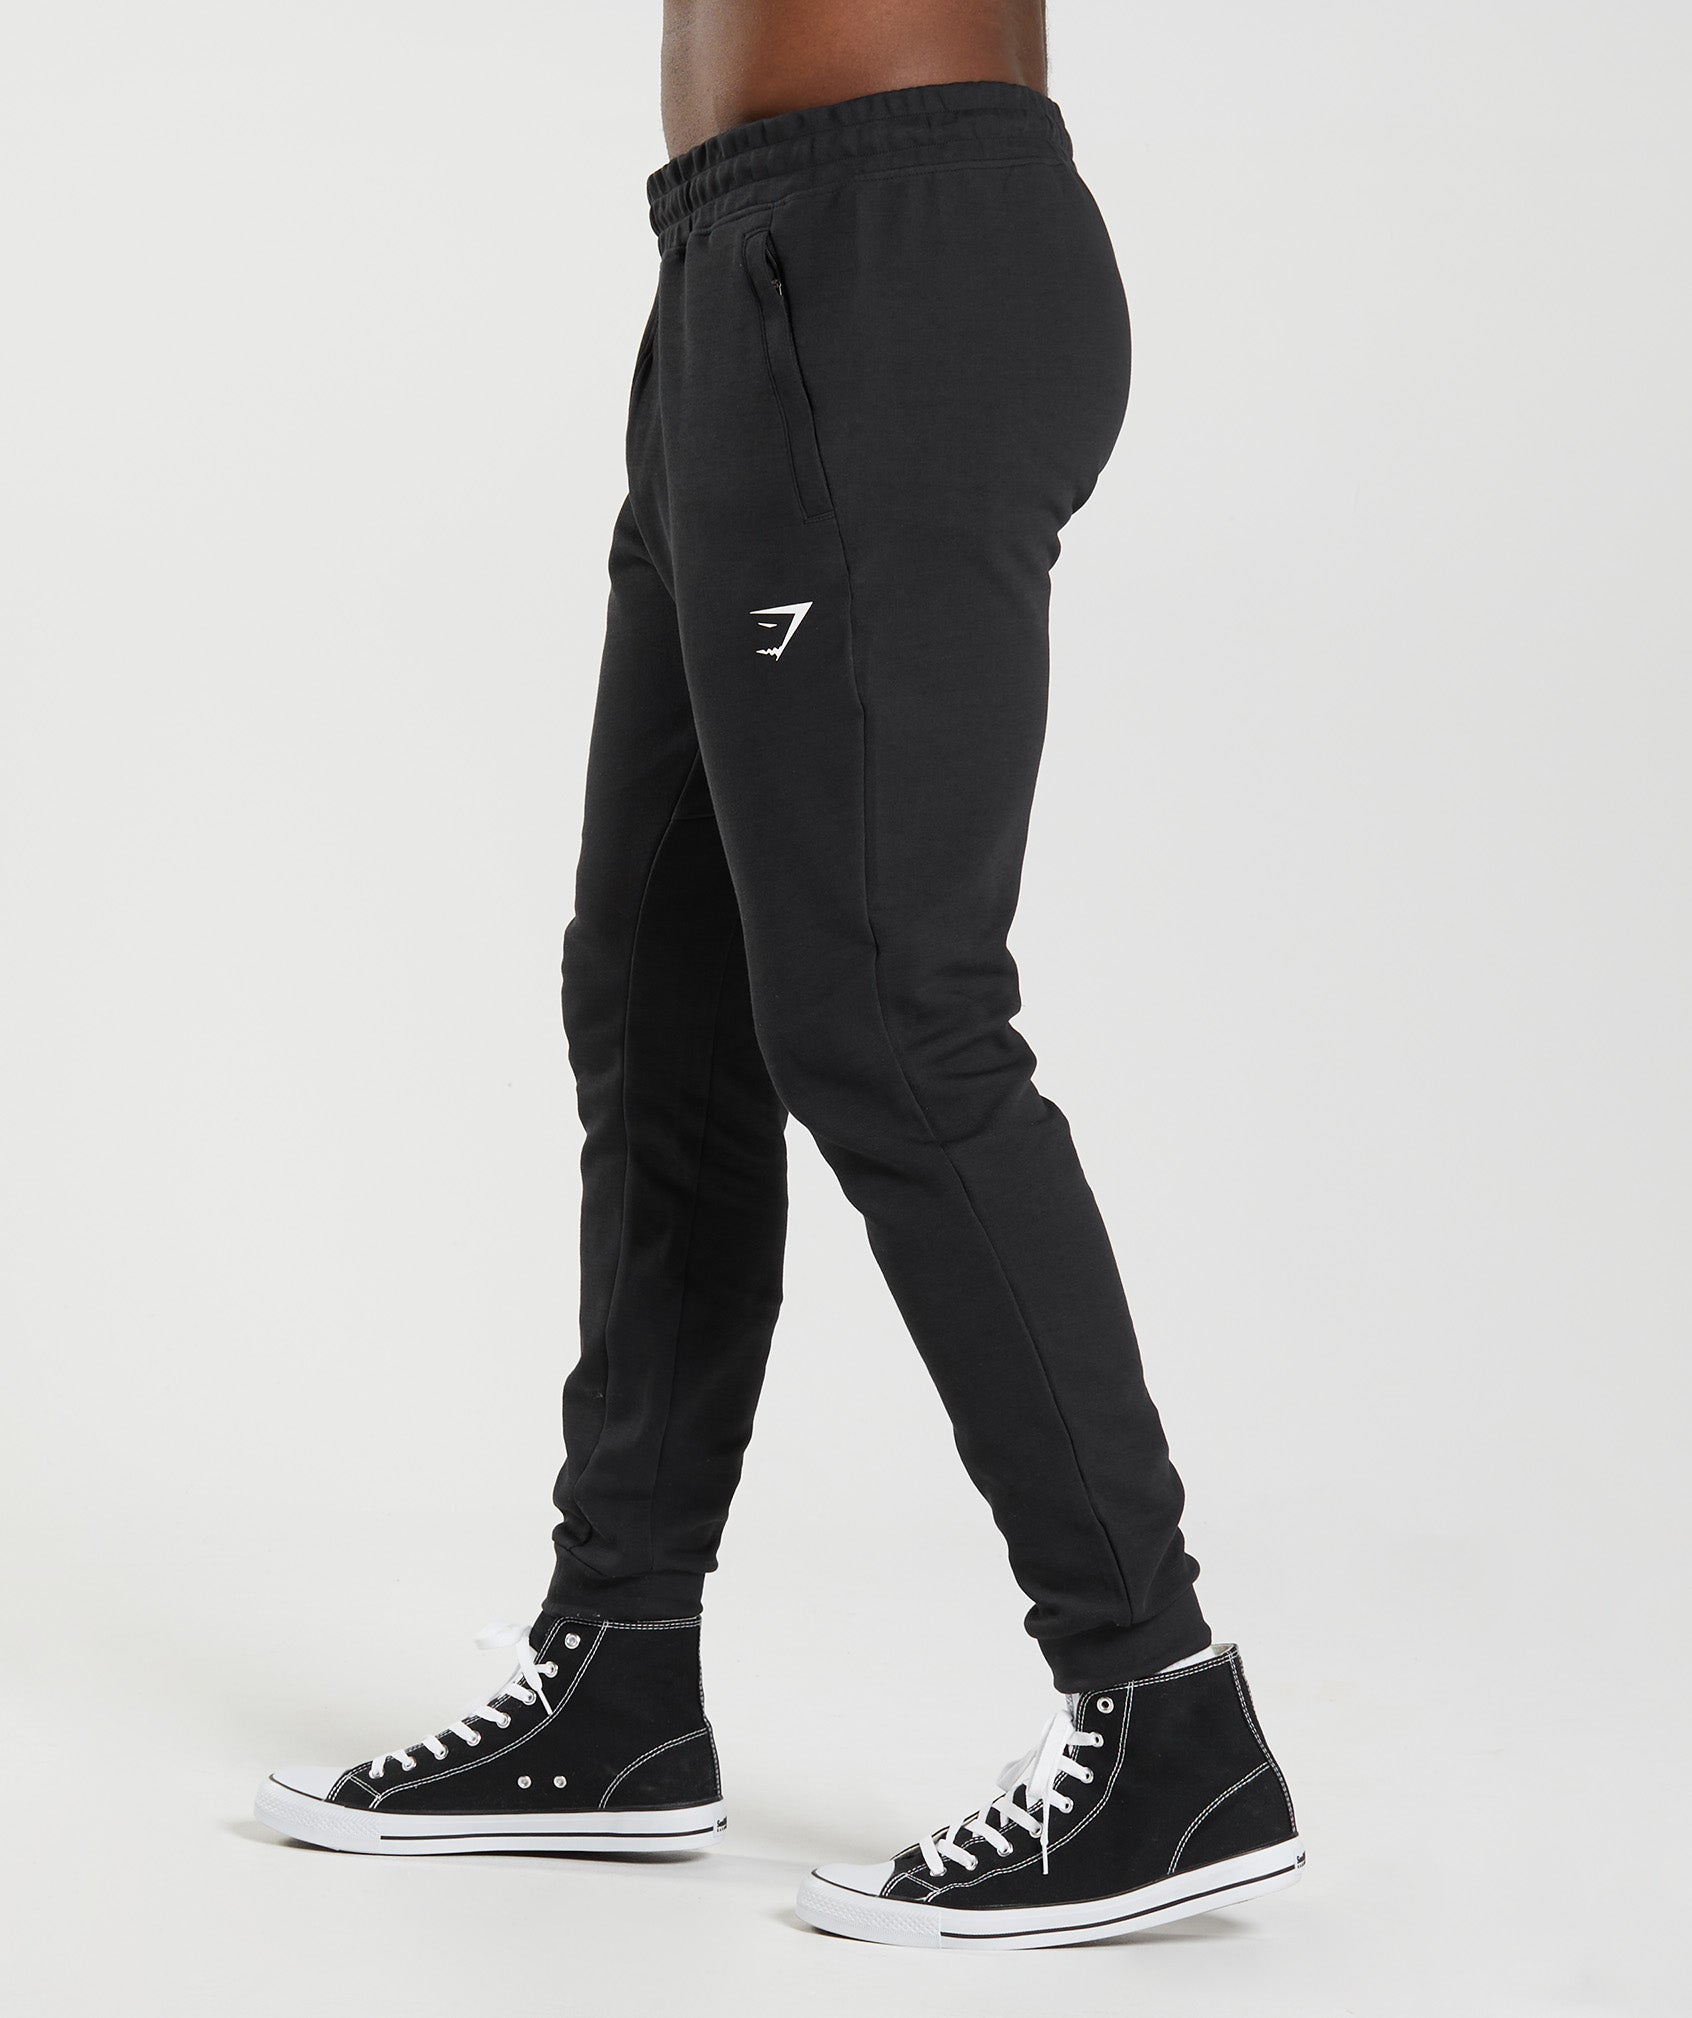 React Joggers in Black - view 3